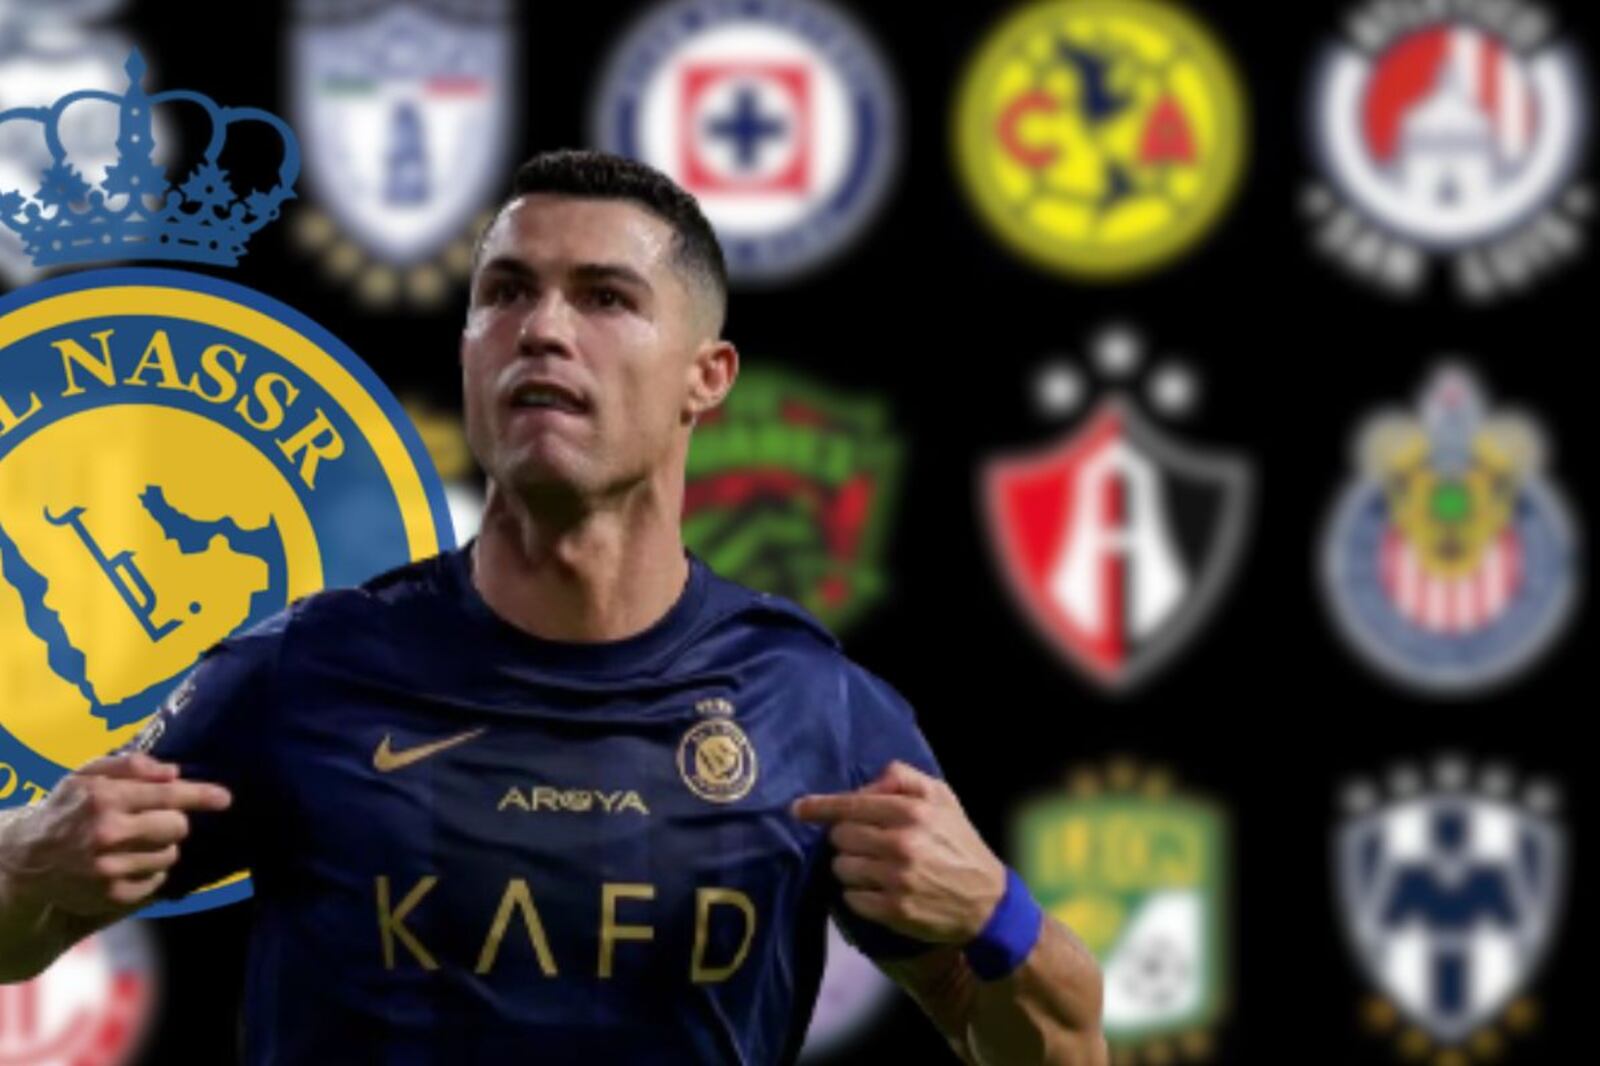 Cristiano Ronaldo's express request to Al-Nassr that would affect a Mexican team